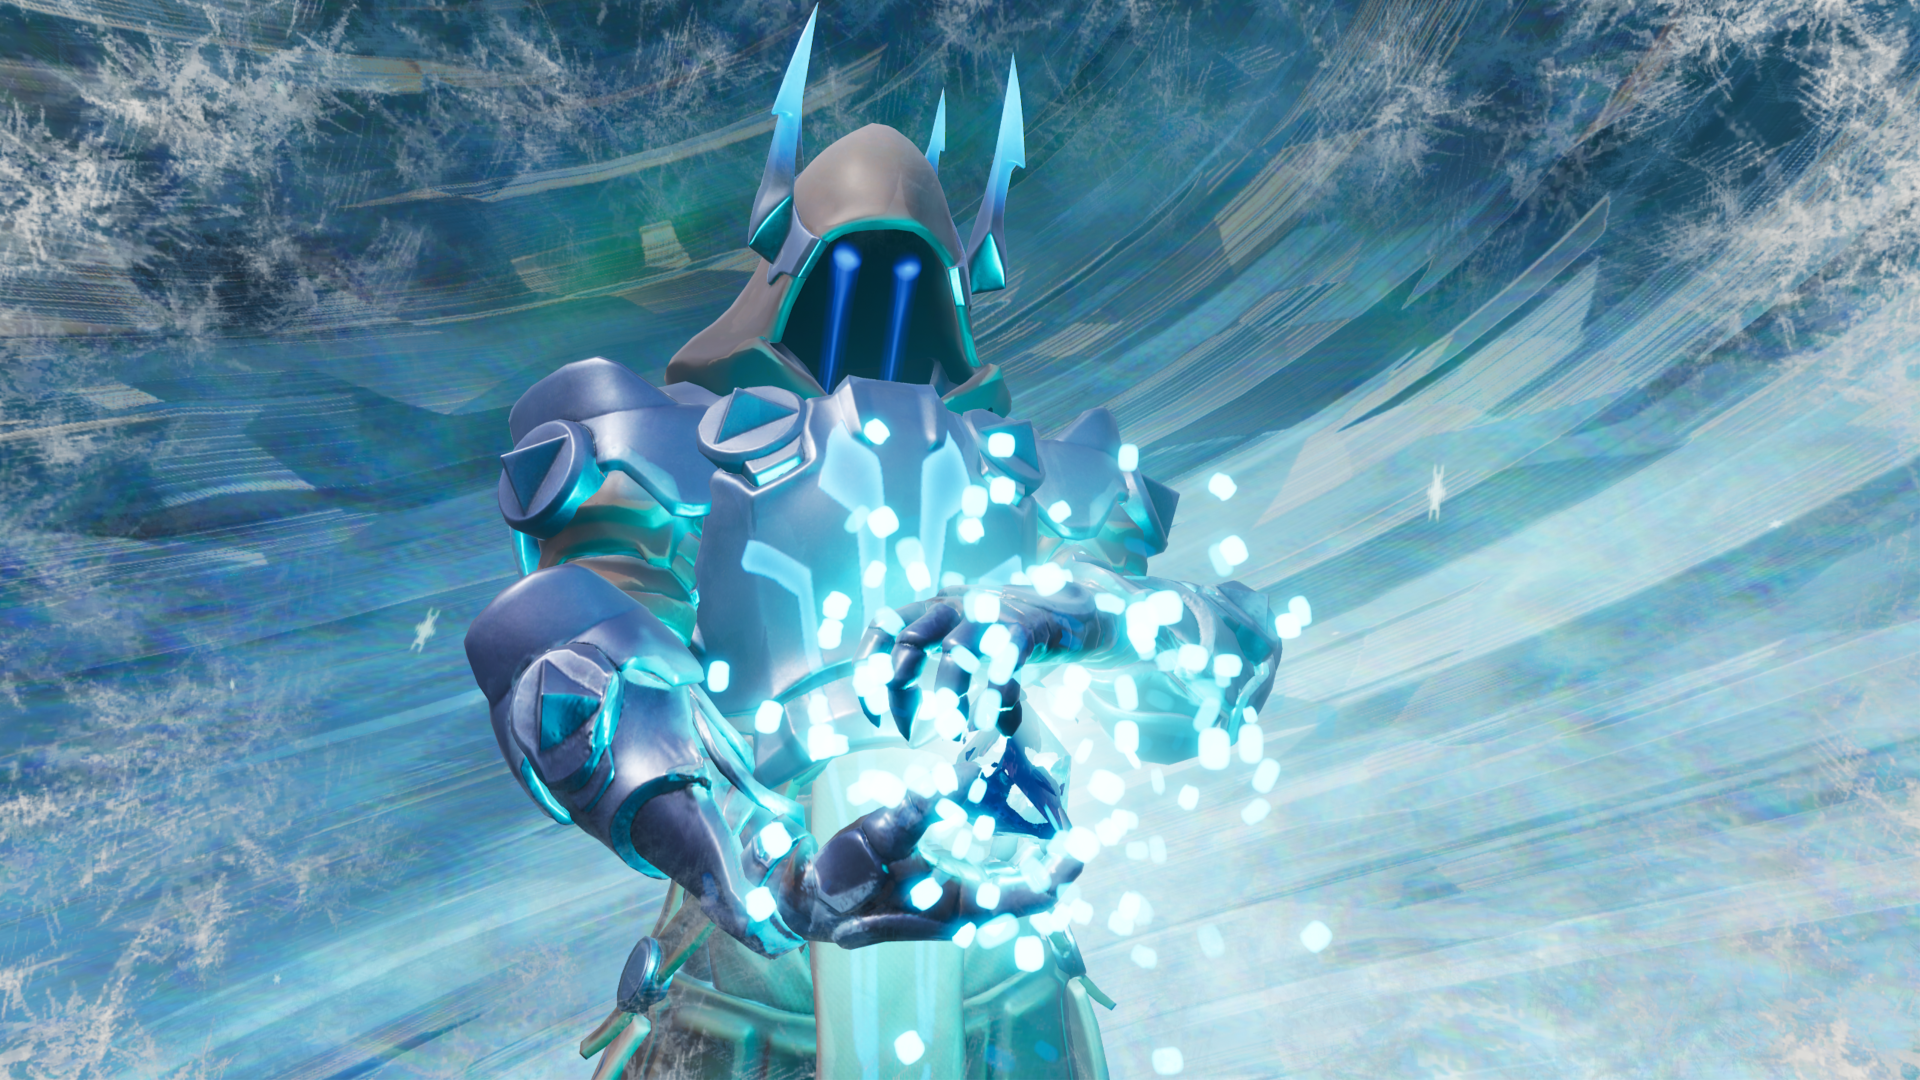 Fortnite Ice King Wallpapers